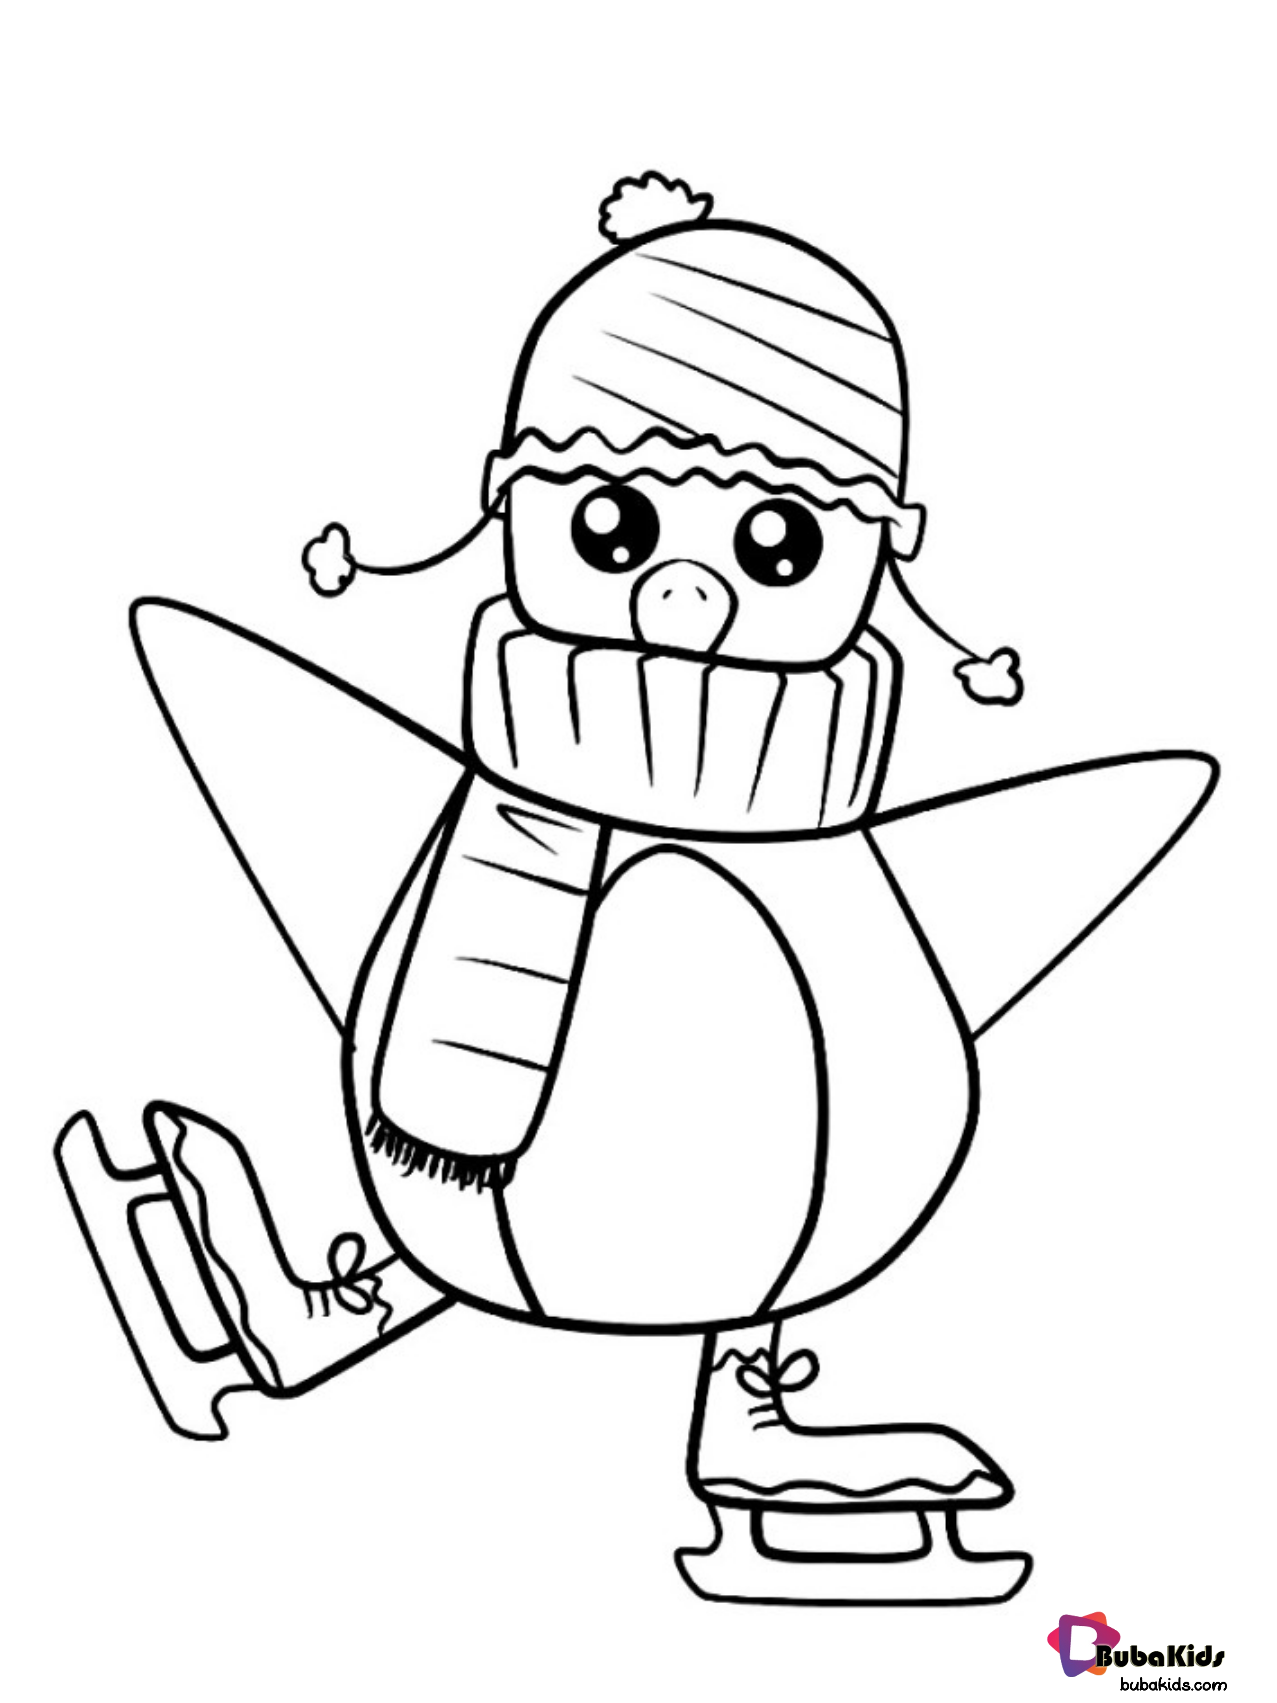 Free printable Cute Penguin coloring page.